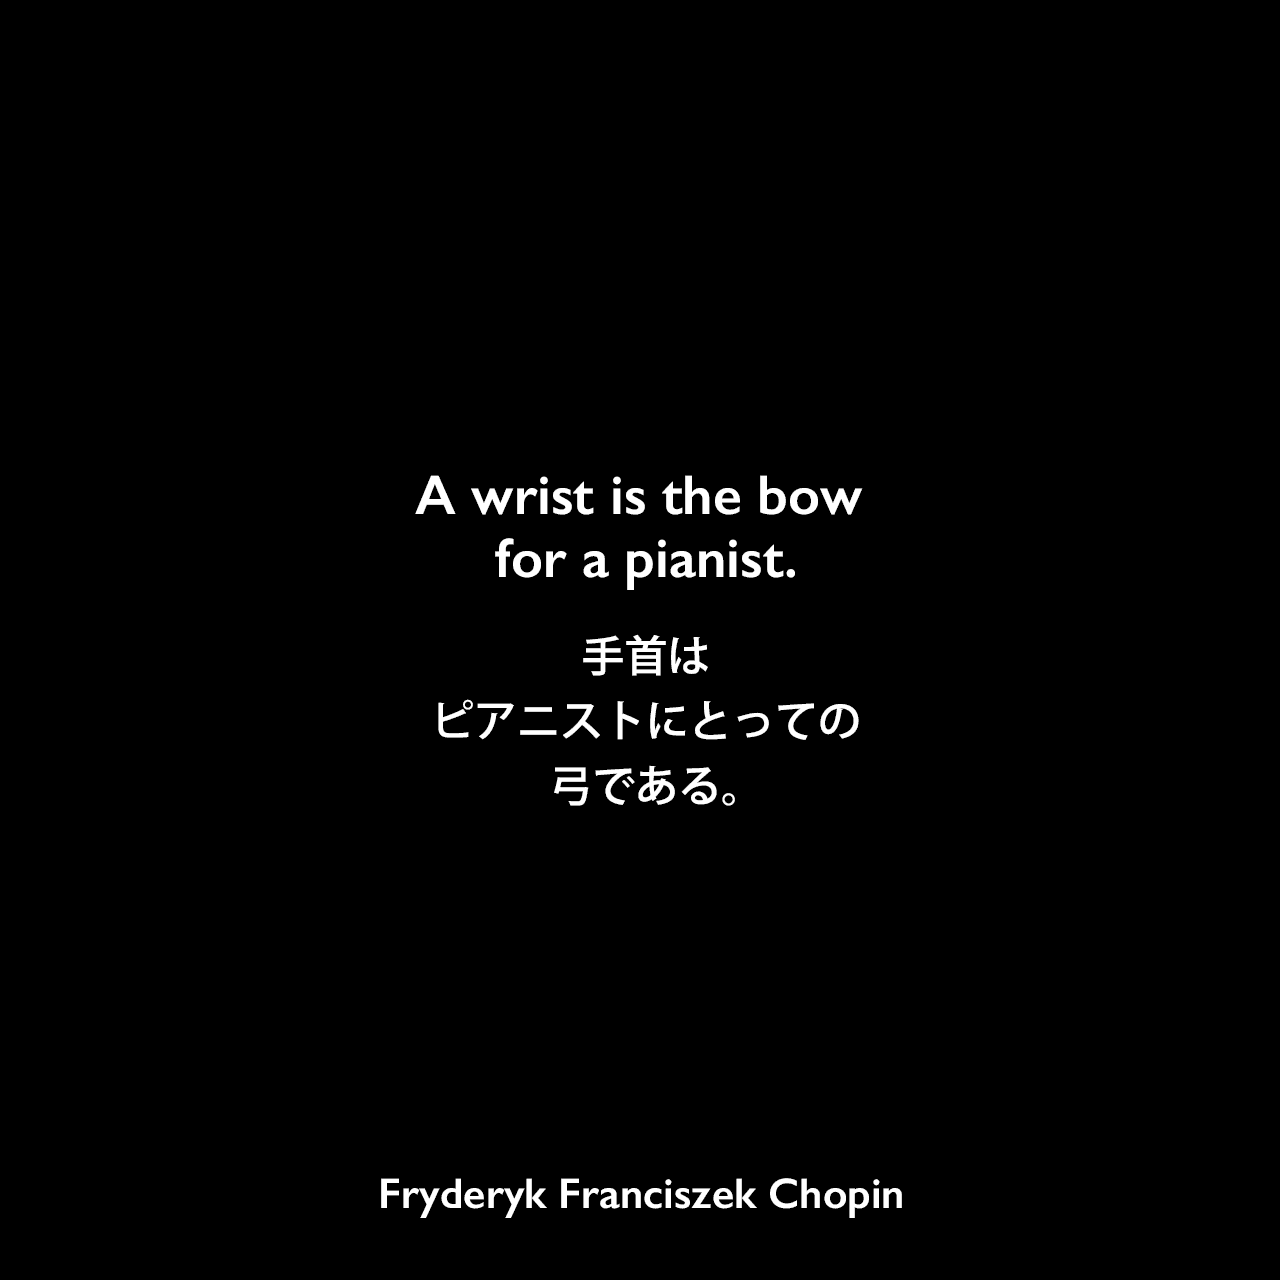 A wrist is the bow for a pianist.手首は、ピアニストにとっての弓である。Fryderyk Franciszek Chopin